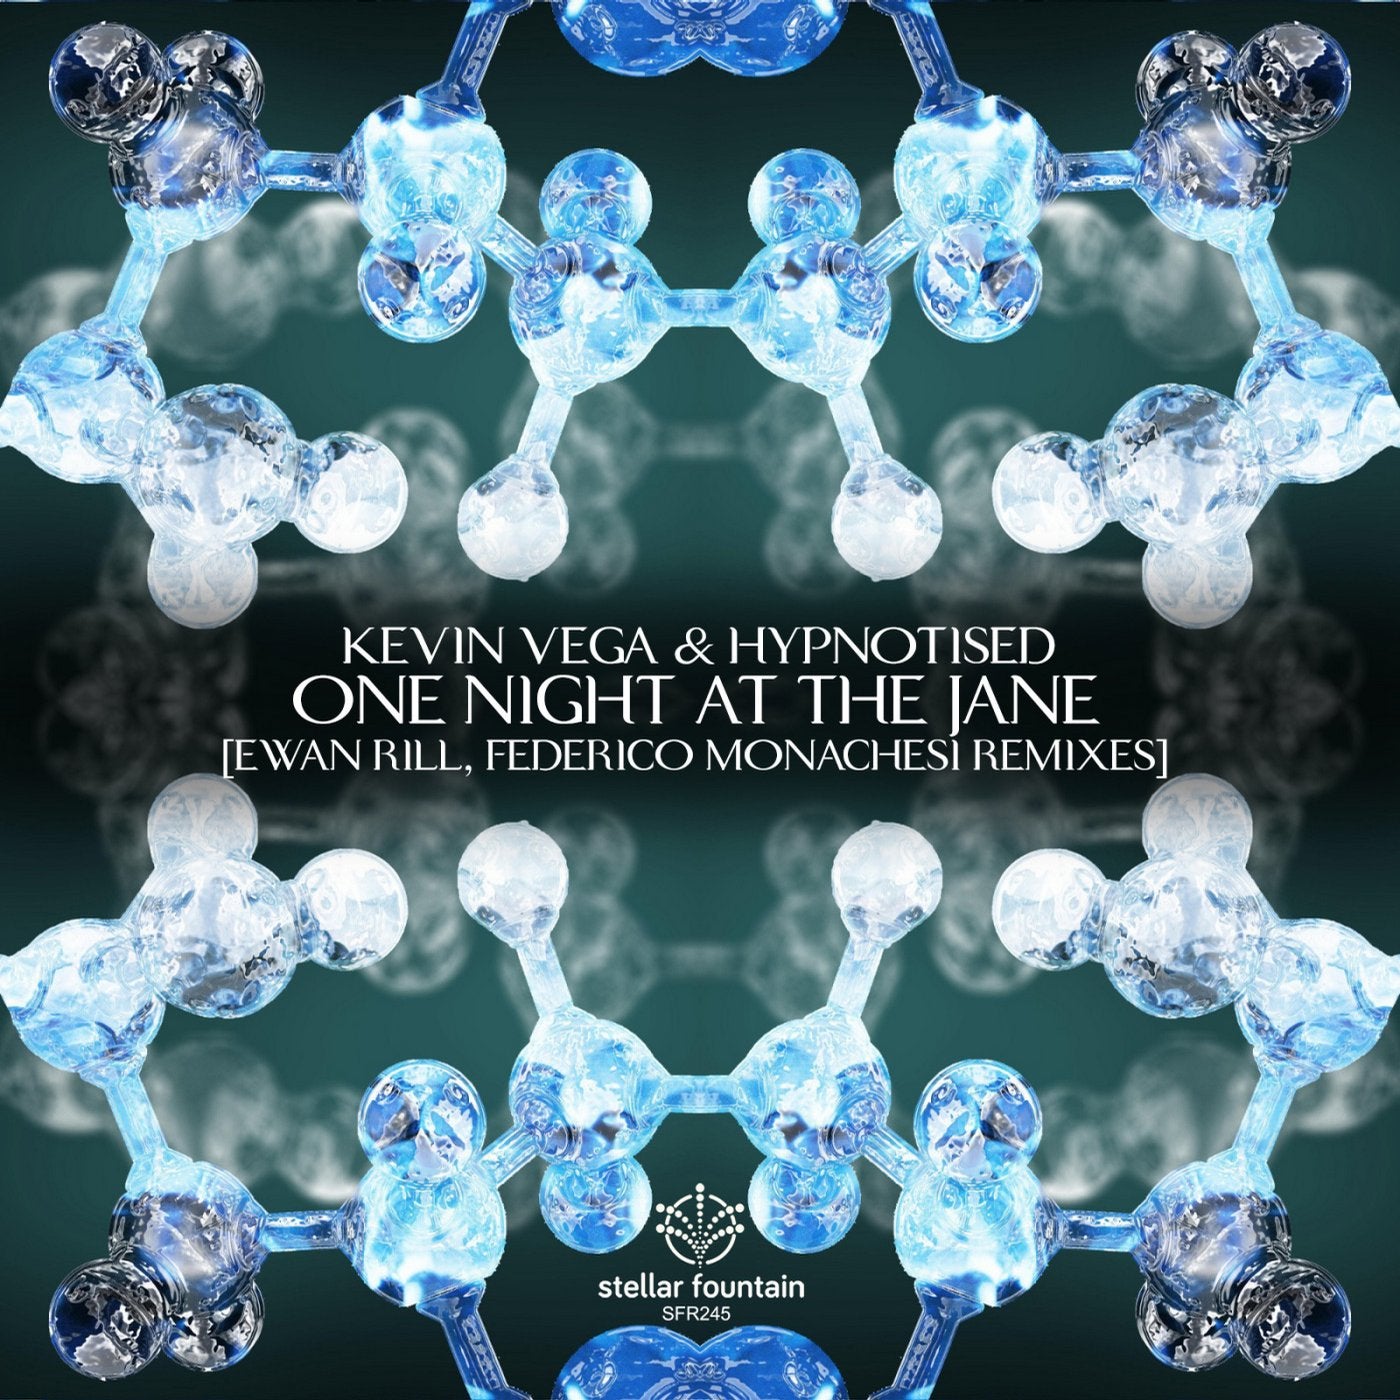 One Night at the Jane